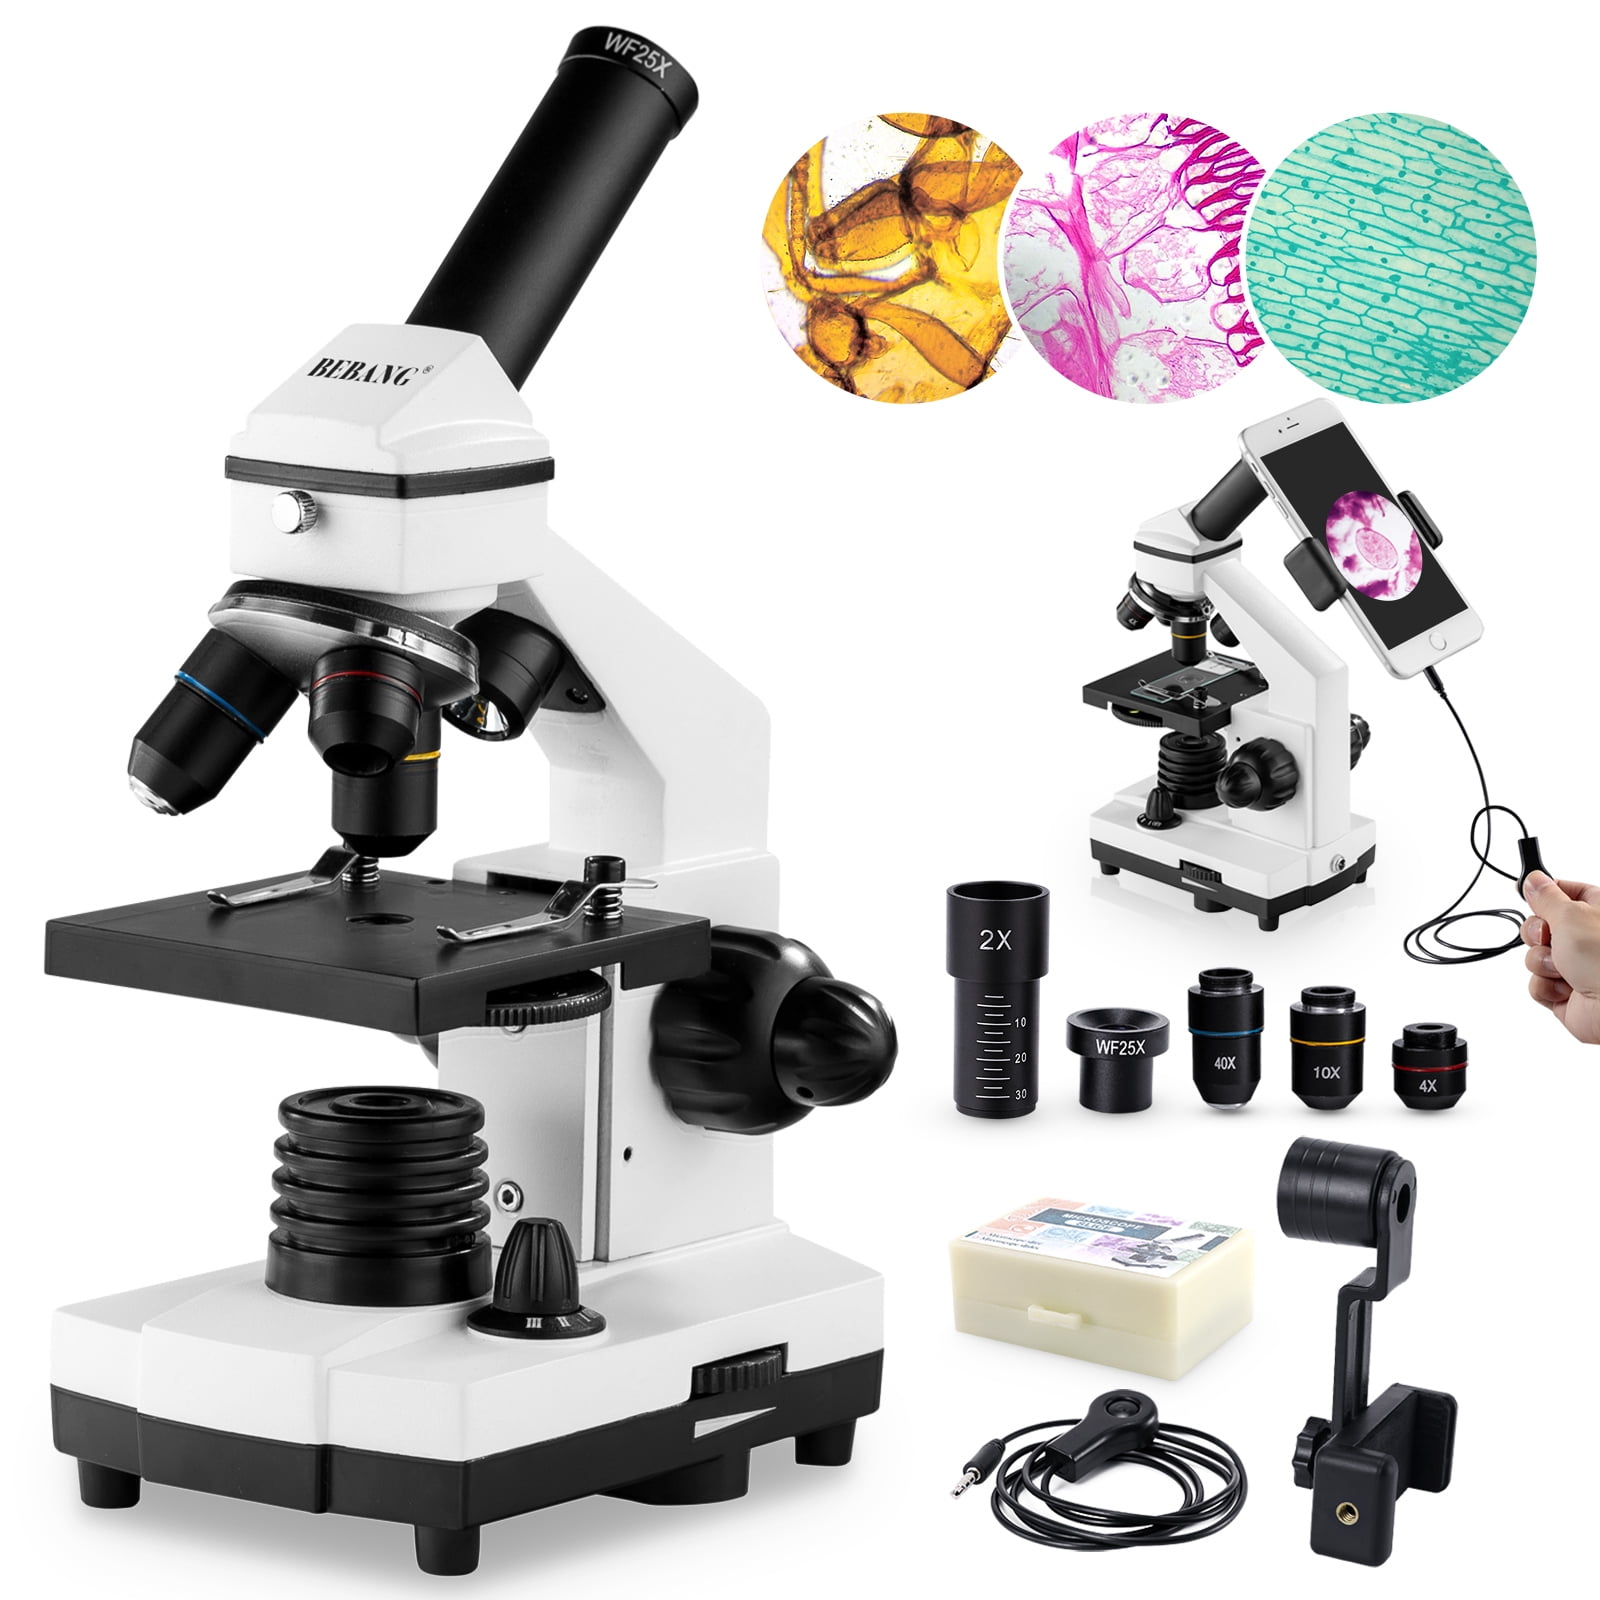 Upgrade Microscope for Kids Students and Adult 40X-1000X Powerful Biological Childrens Microscope Set for School Laboratory Home Biological Scientific Research Education 